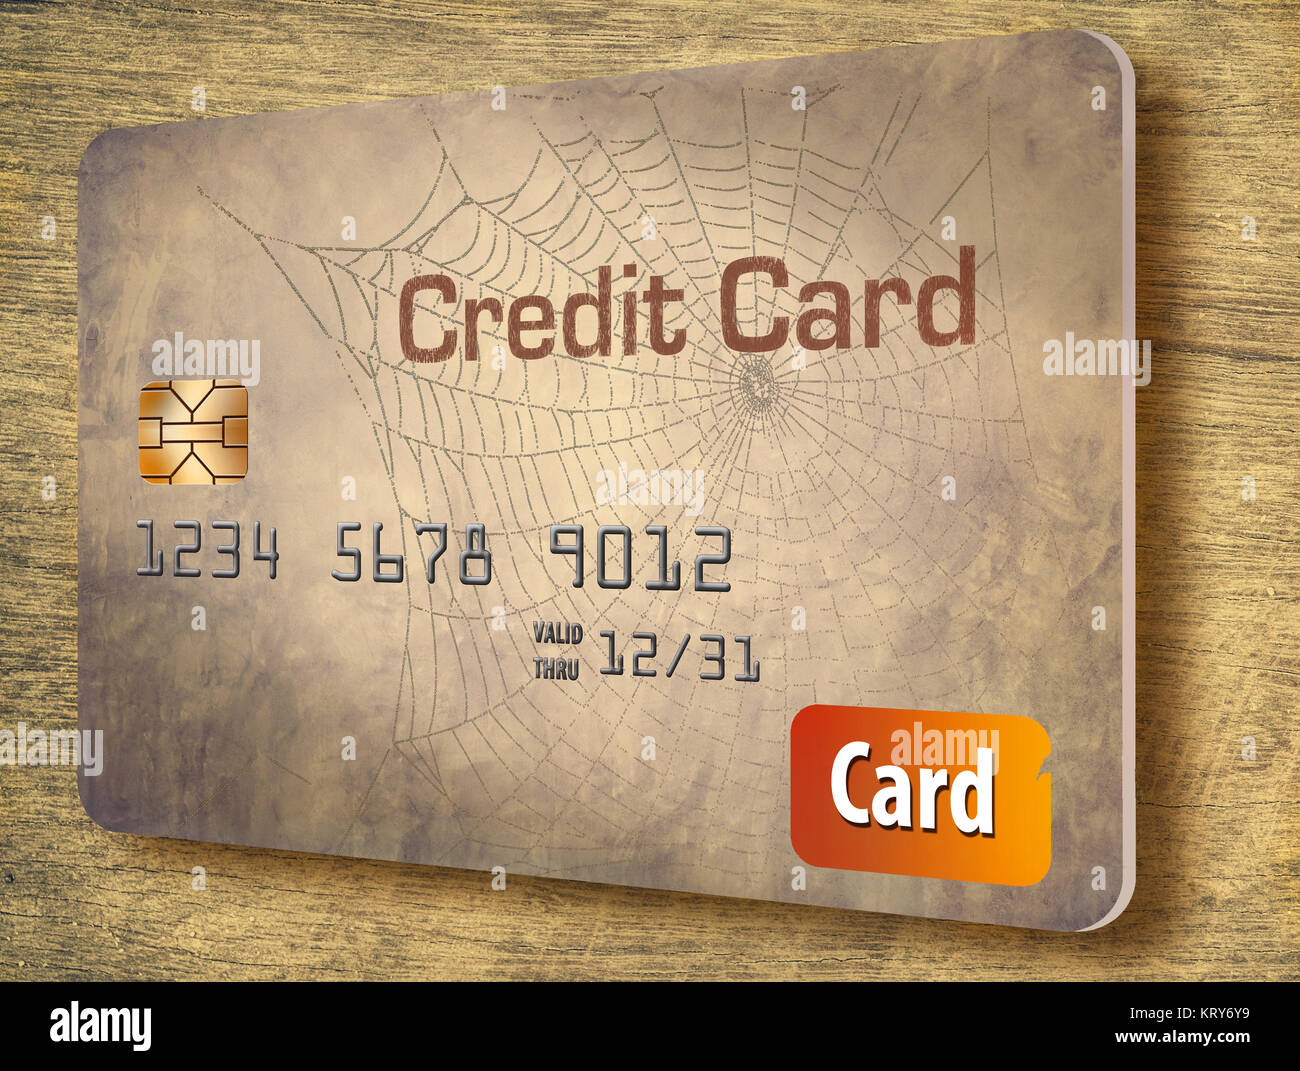 Old credit card accounts you don't use could be closed by the issuer and adversely impact your credit score. This is a 3-D illustration of an aged and Stock Photo